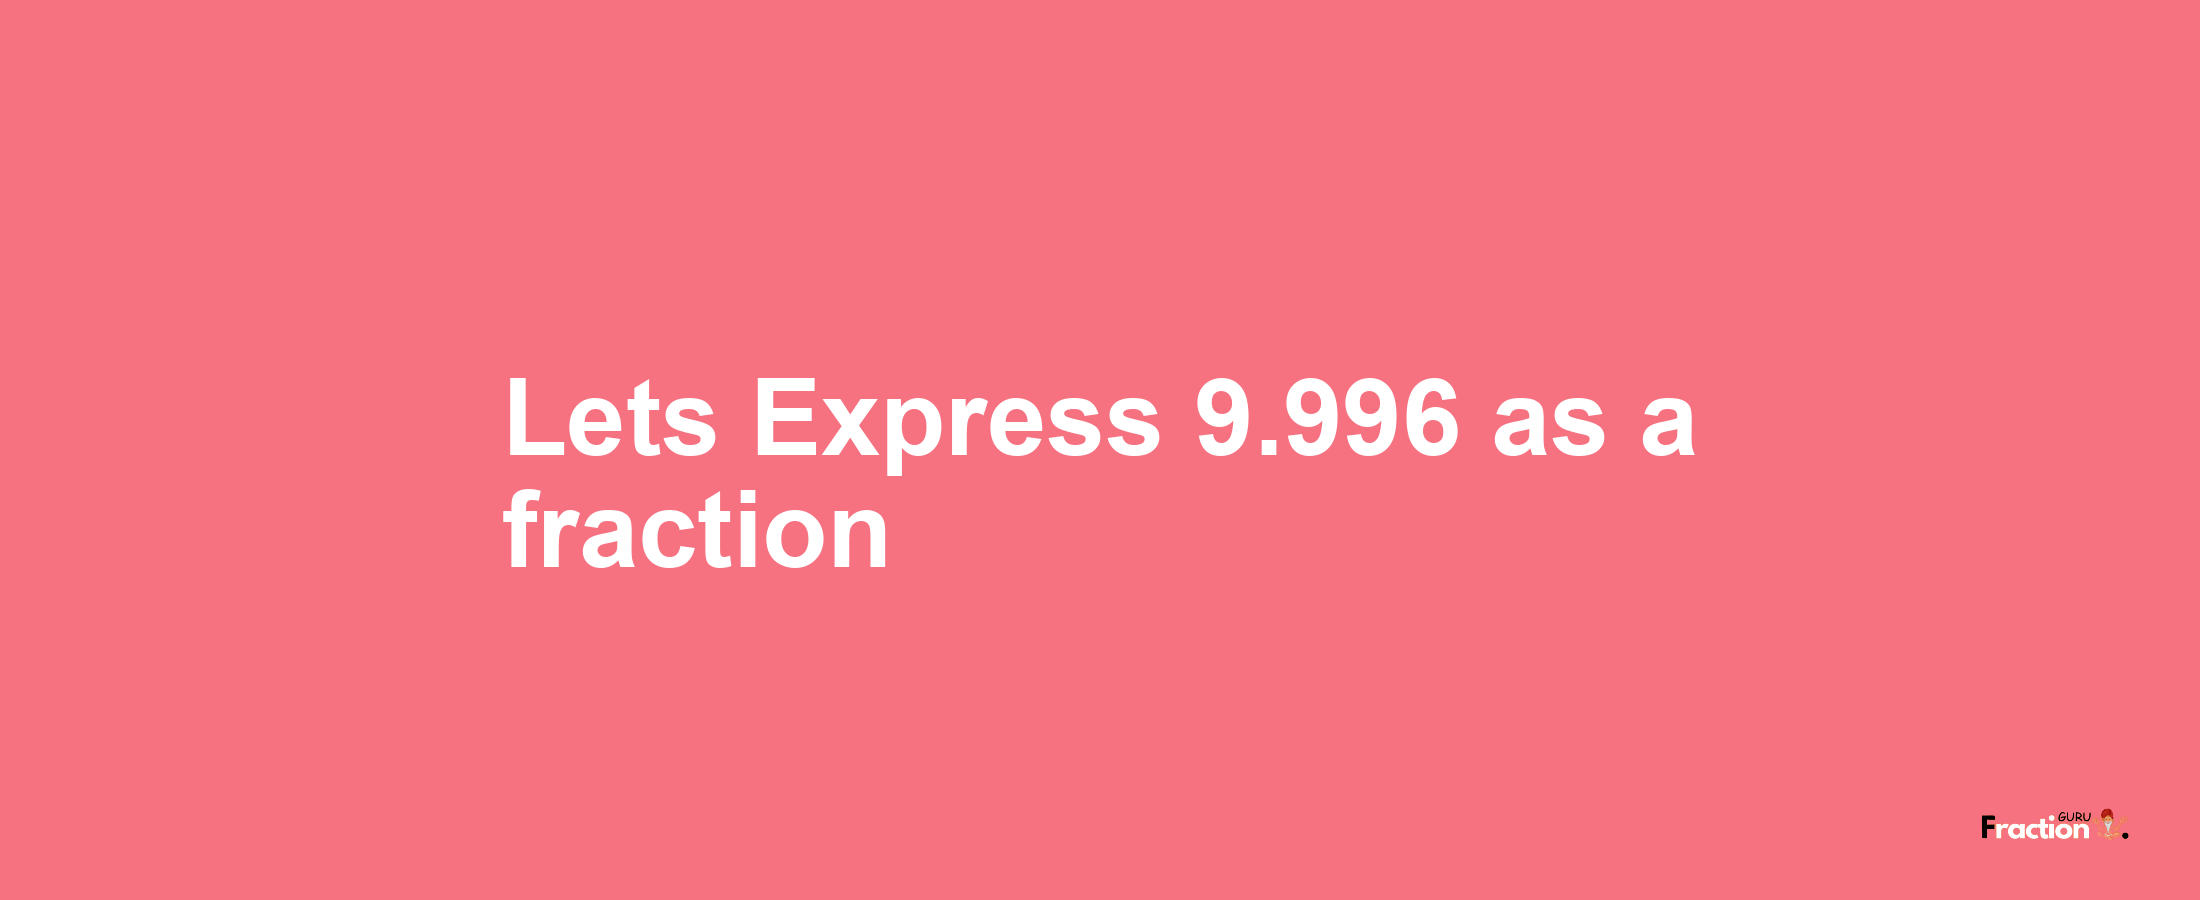 Lets Express 9.996 as afraction